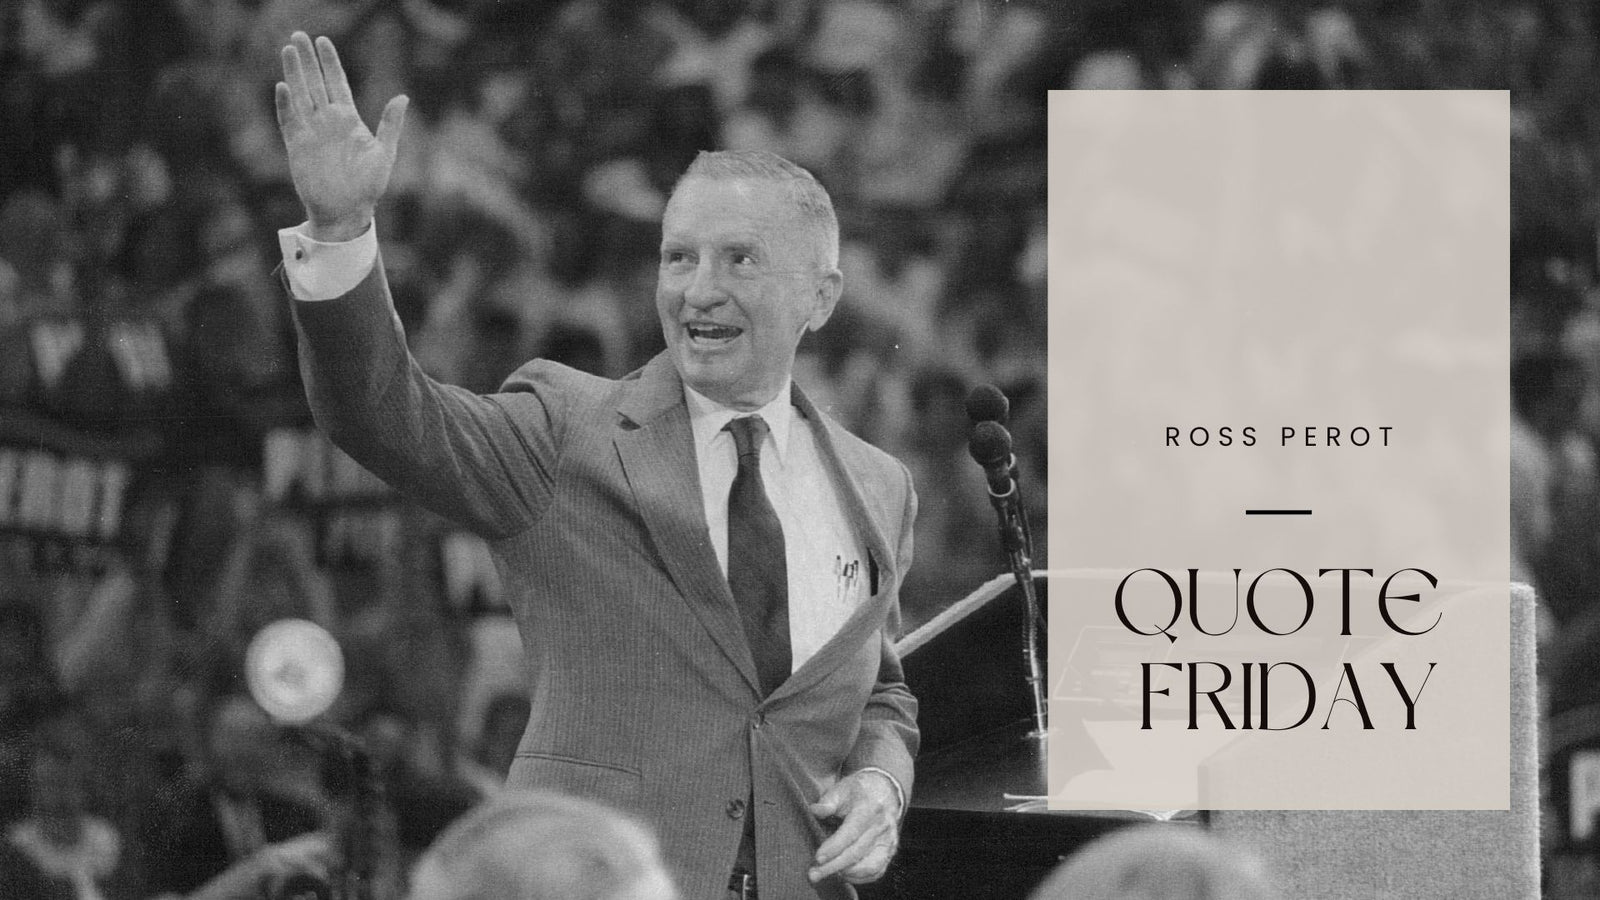 Quote Friday: Ross Perot